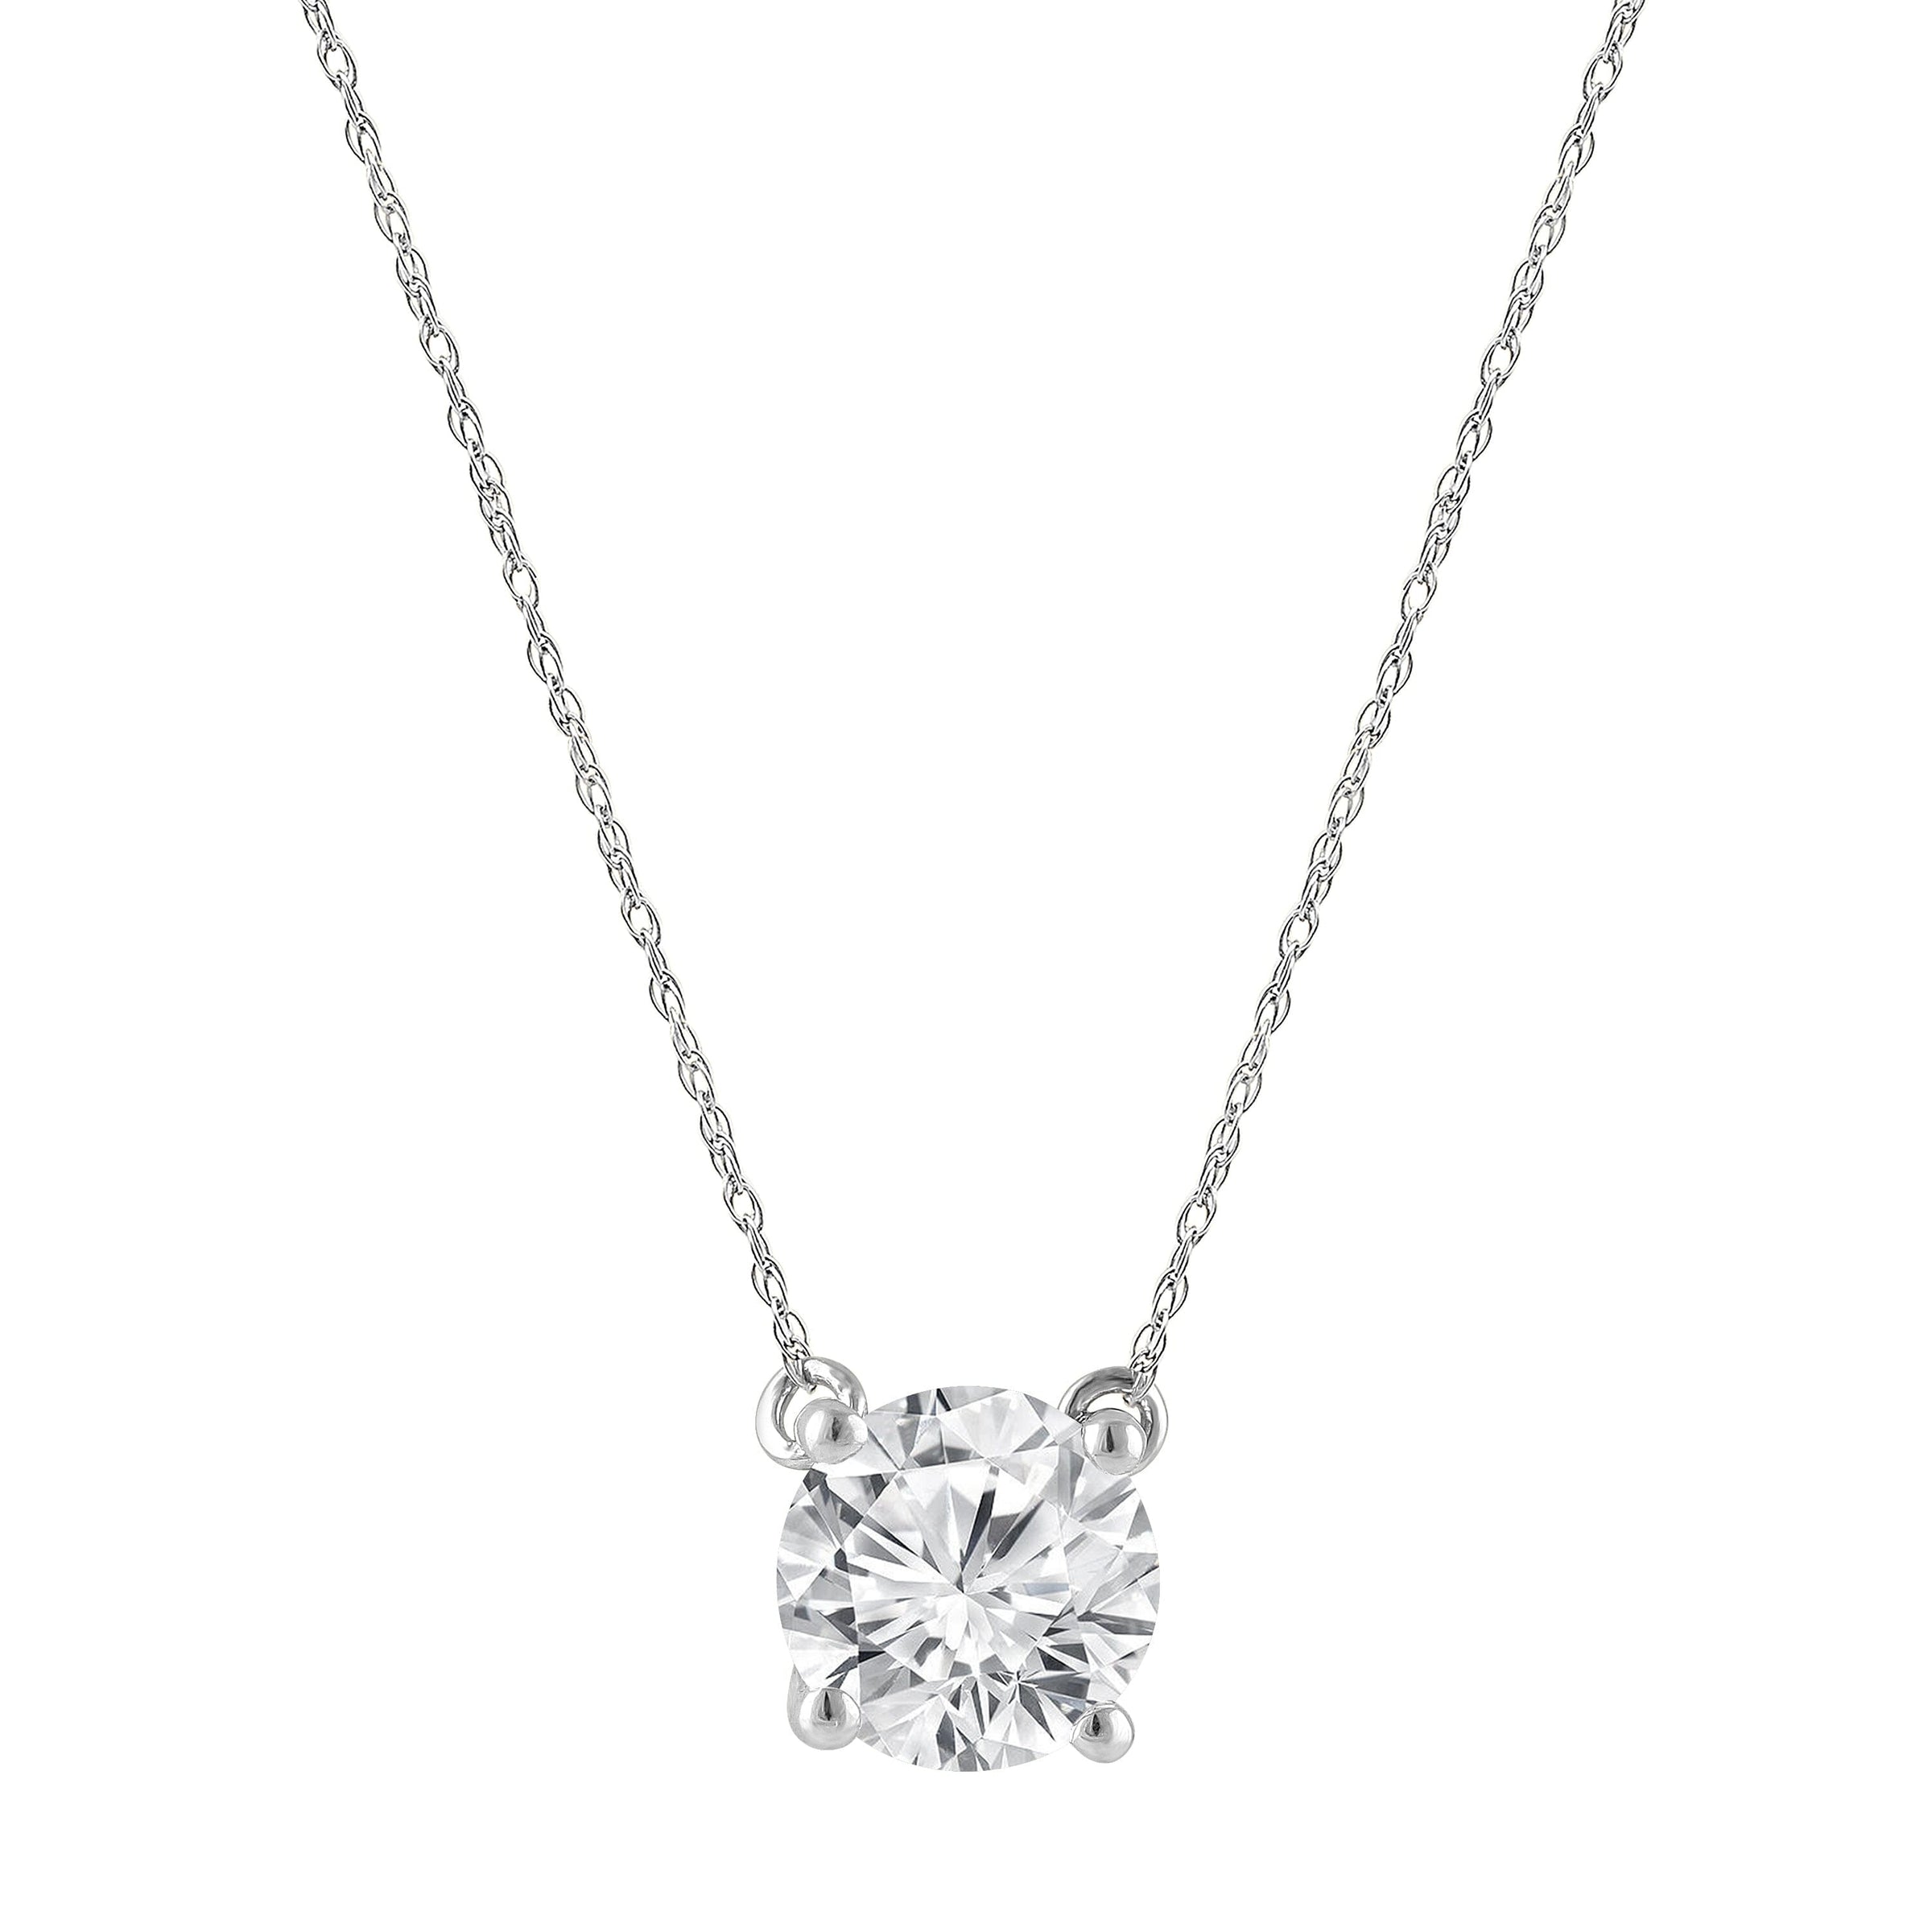 Meera 1.00ct Laboratory Grown Solitaire Diamond Necklace in 9ct White Gold Necklaces Bevilles 